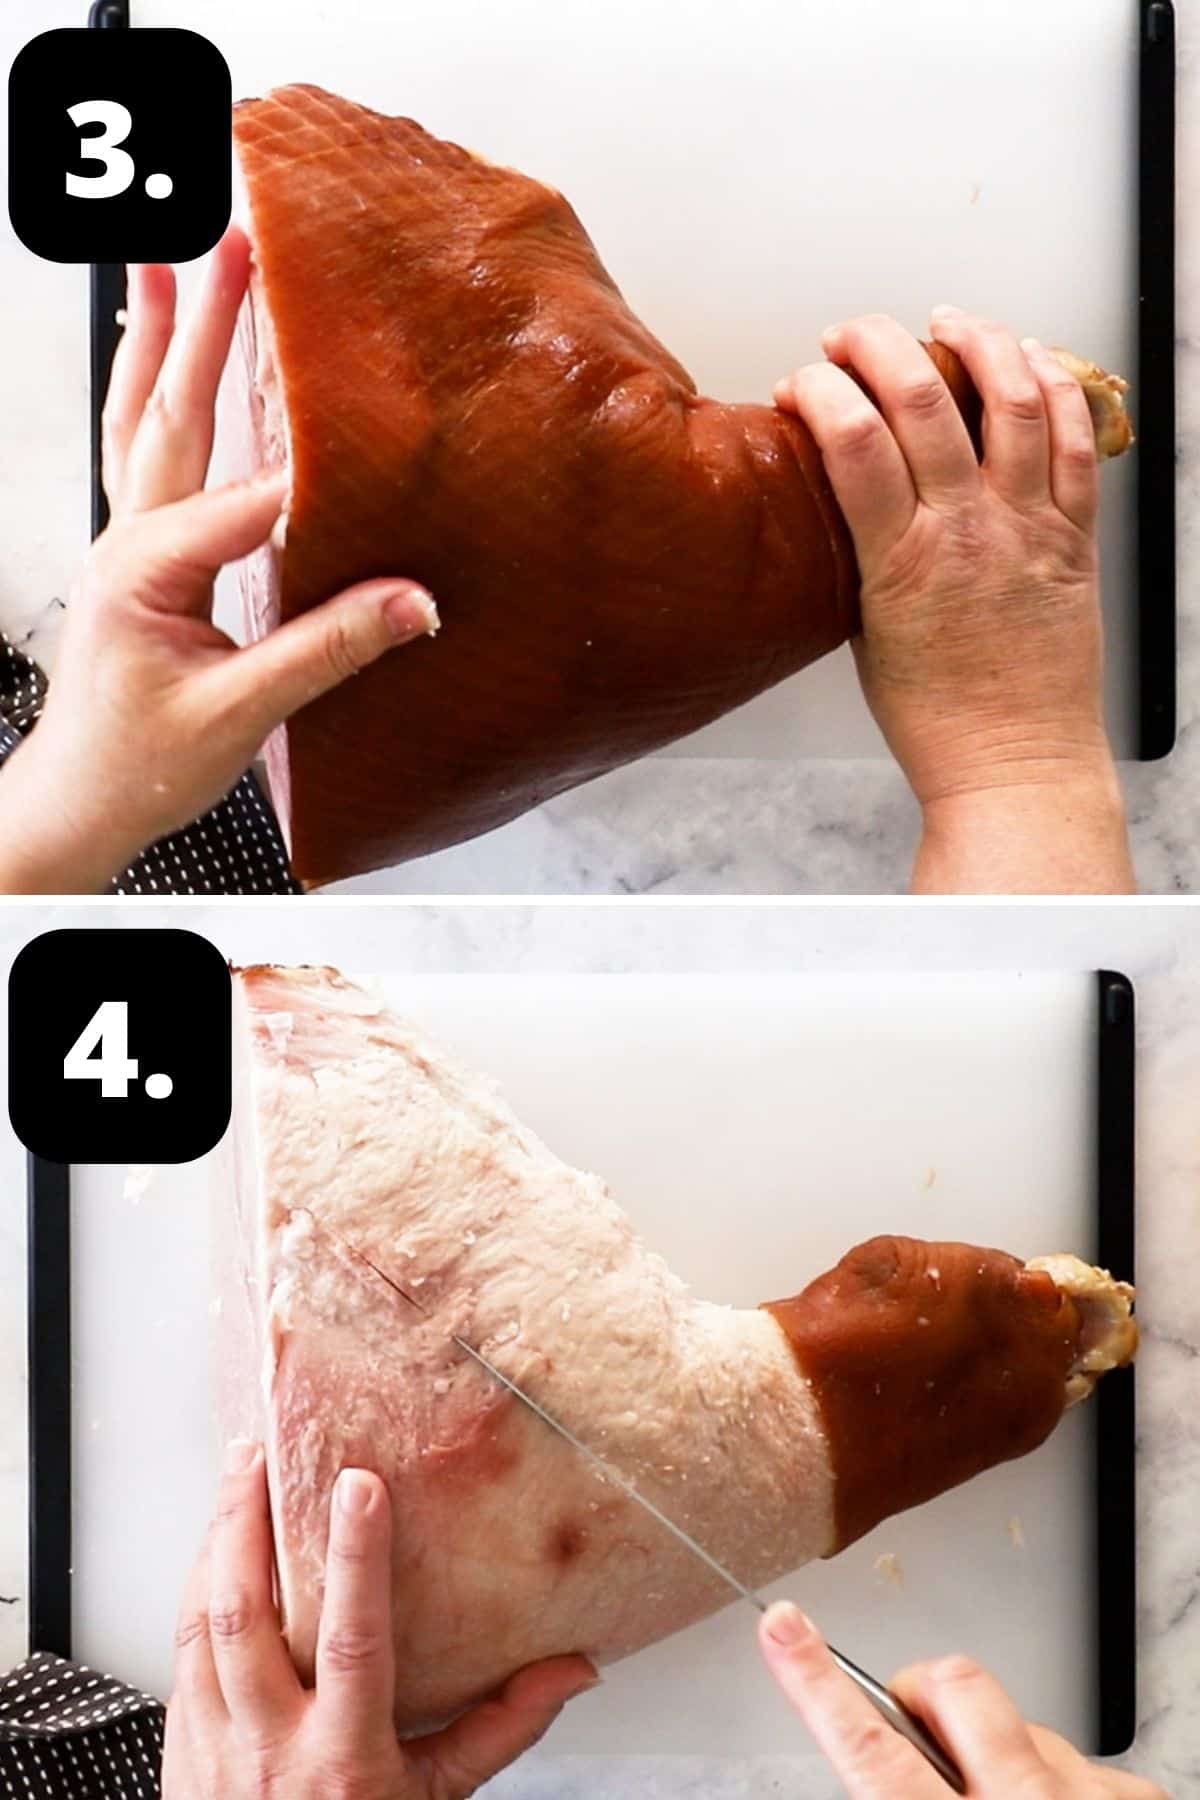 Steps 3-4 of preparing this recipe - sliding fingers under the skin to help ease it off and scoring the fat with a knife.